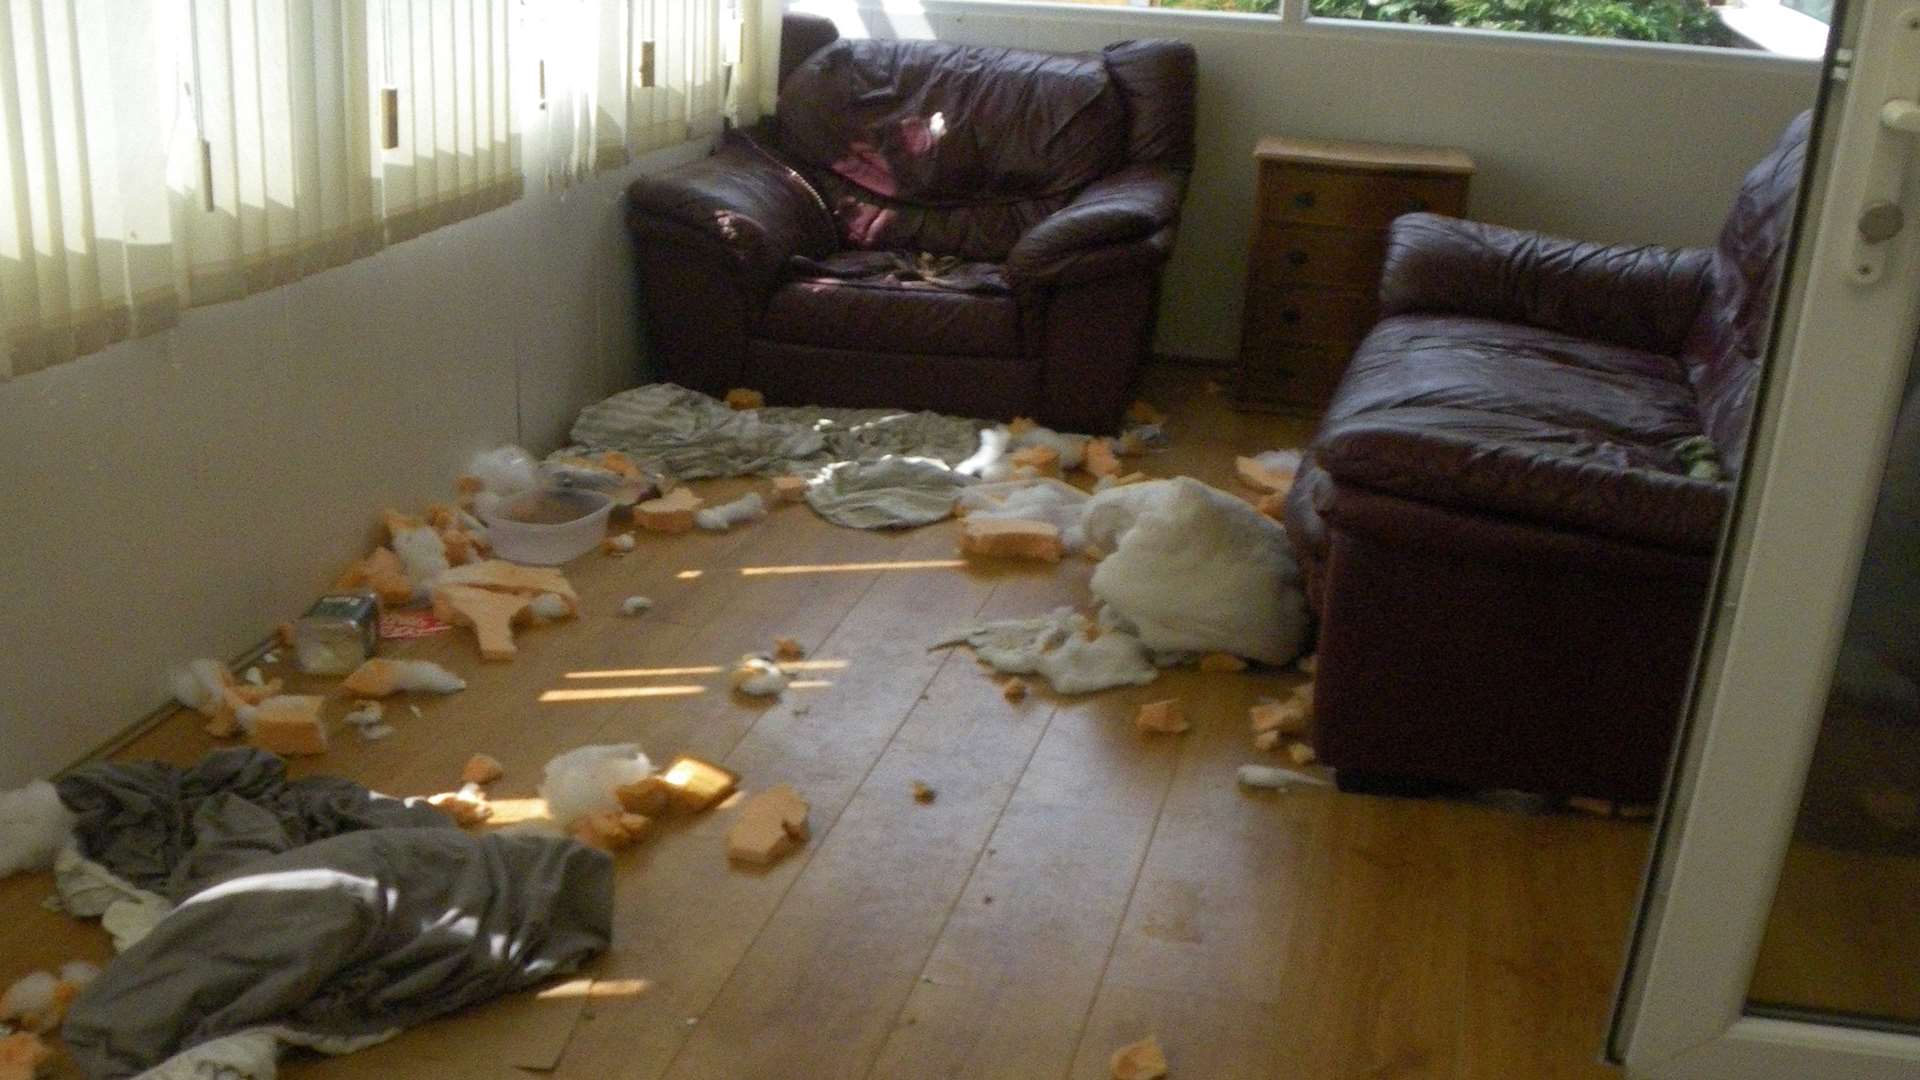 The distressed staffie damaged furnishings after being locked in the sweltering conservatory.